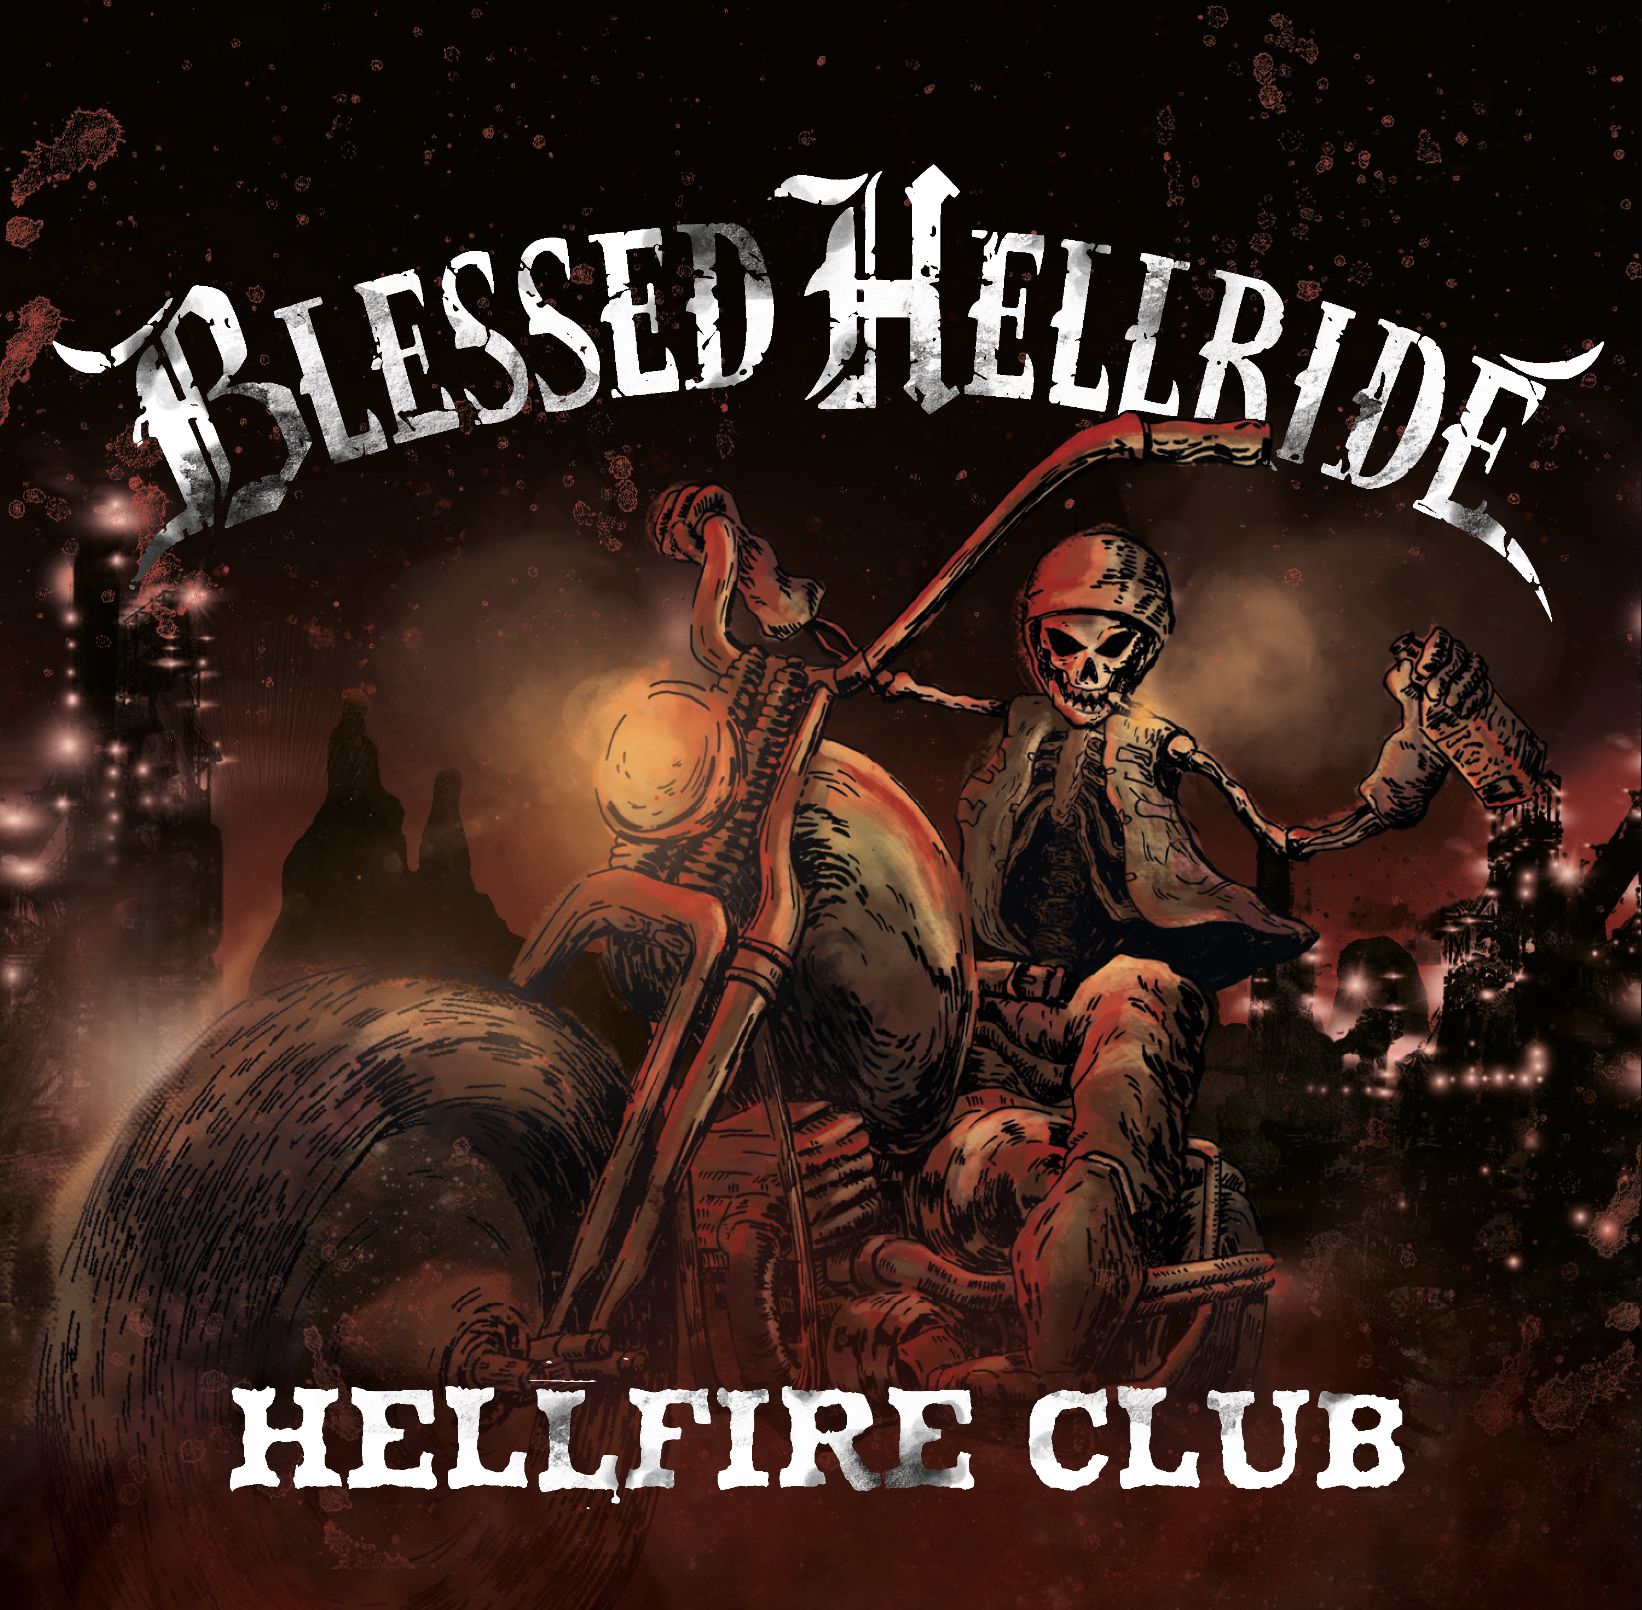 BLESSED HELLRIDE (Southern/Groove Metal - Germany) - Their newest album 